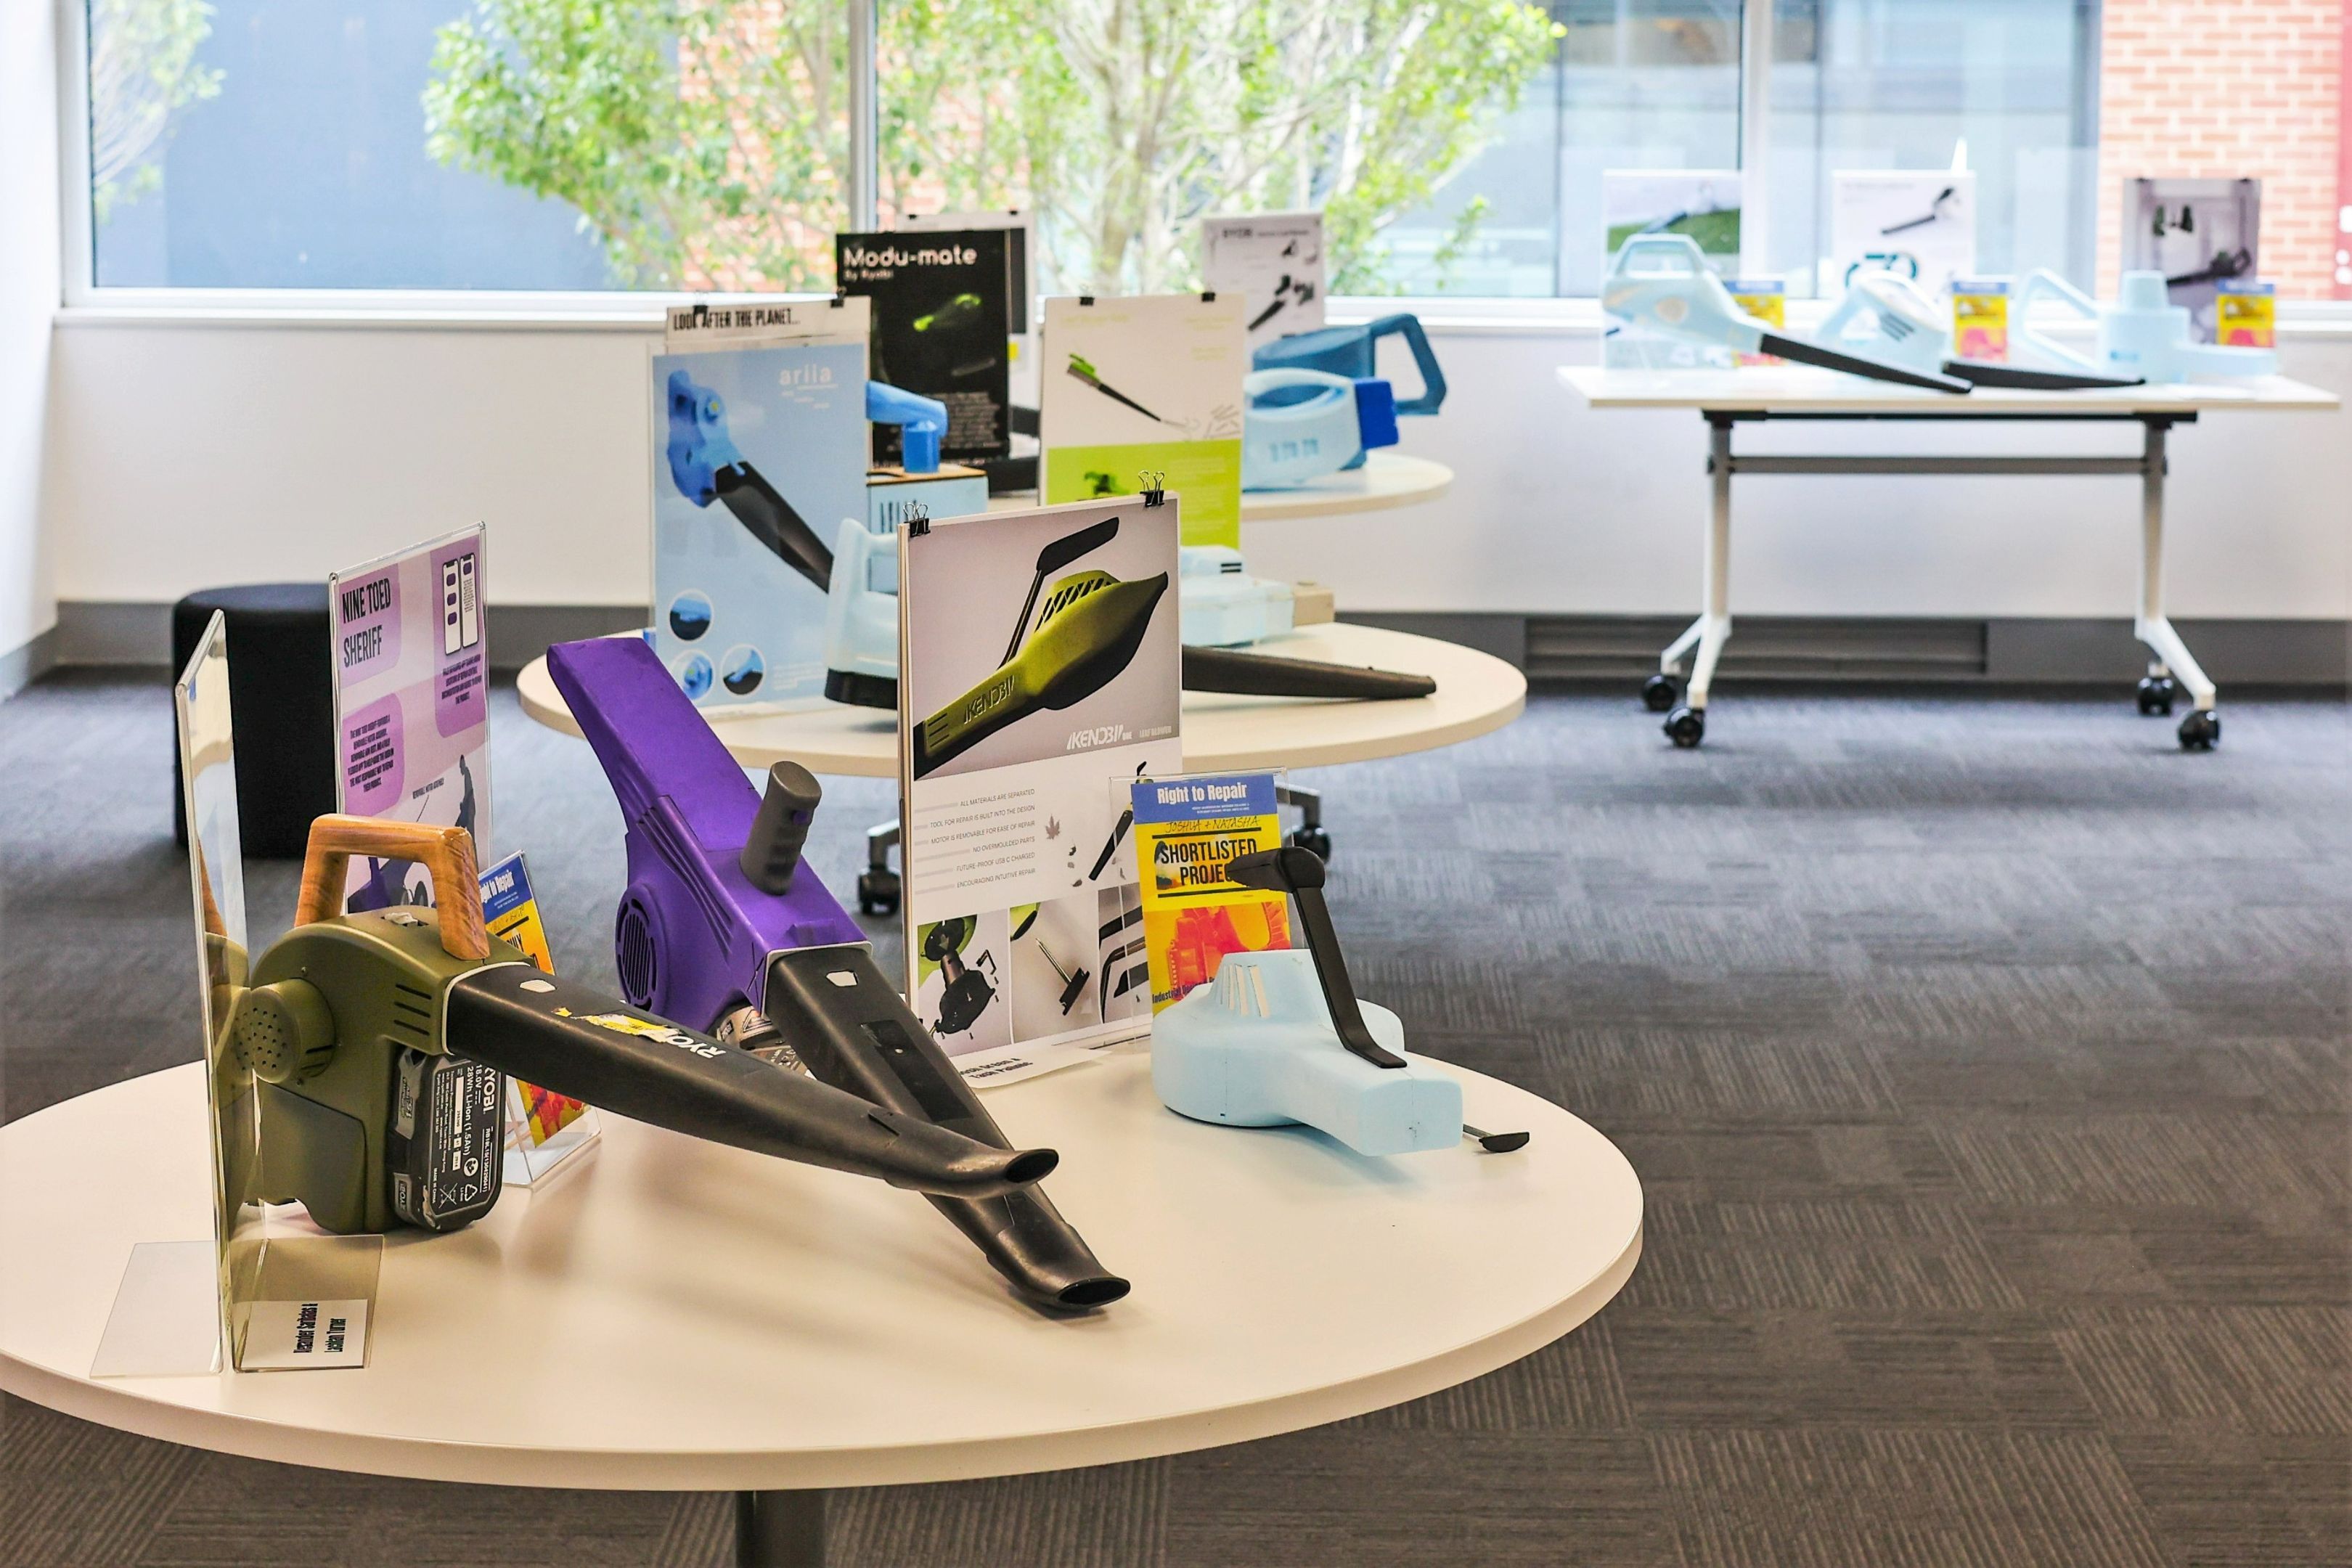 A range of leaf blower prototypes, some made from coloured plastics and others from blue sculpting foam, are displayed on tables next to informative signs